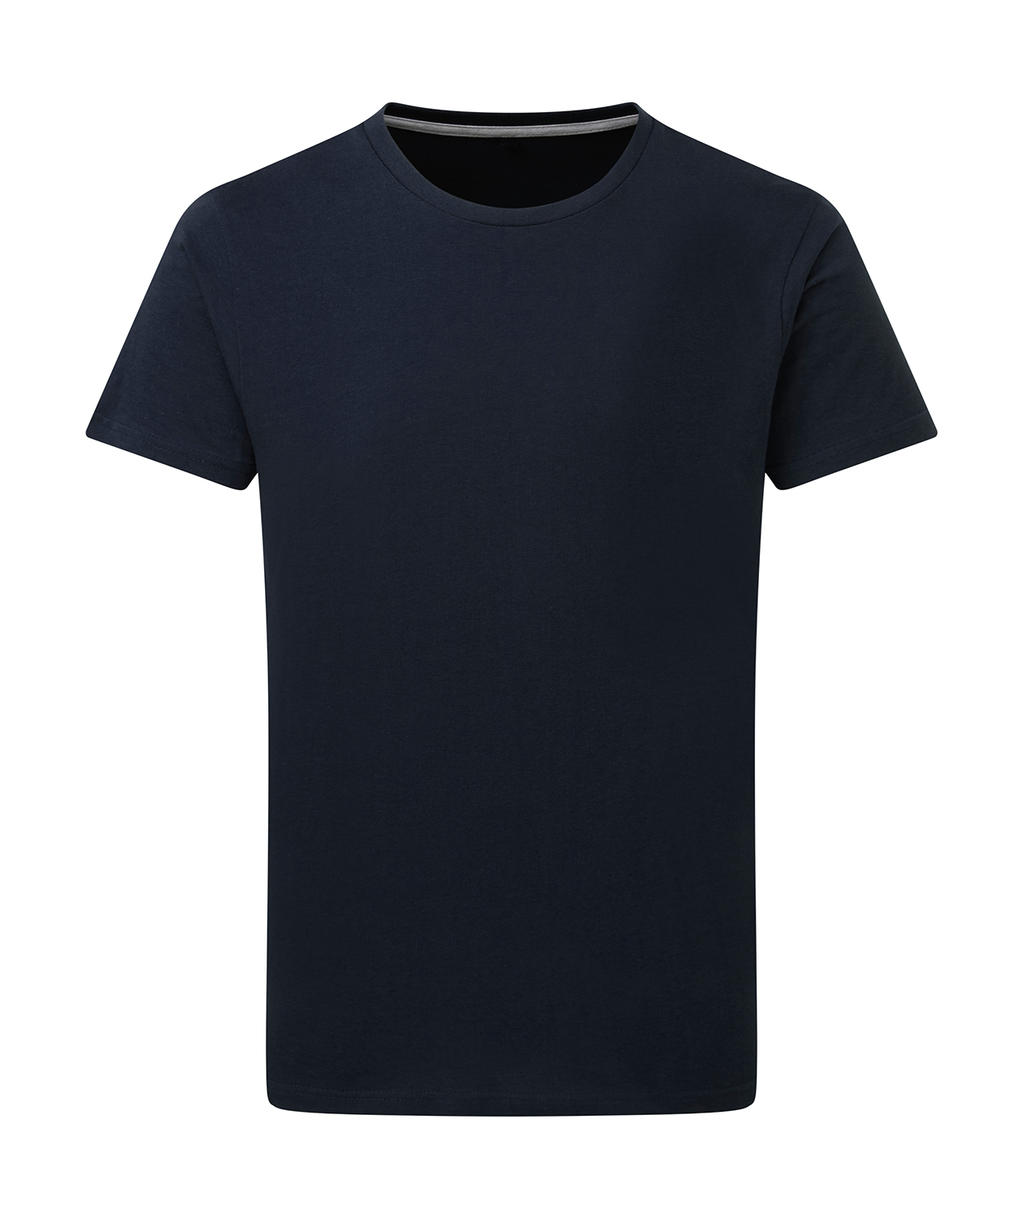  Perfect Print Tagless Tee in Farbe Navy